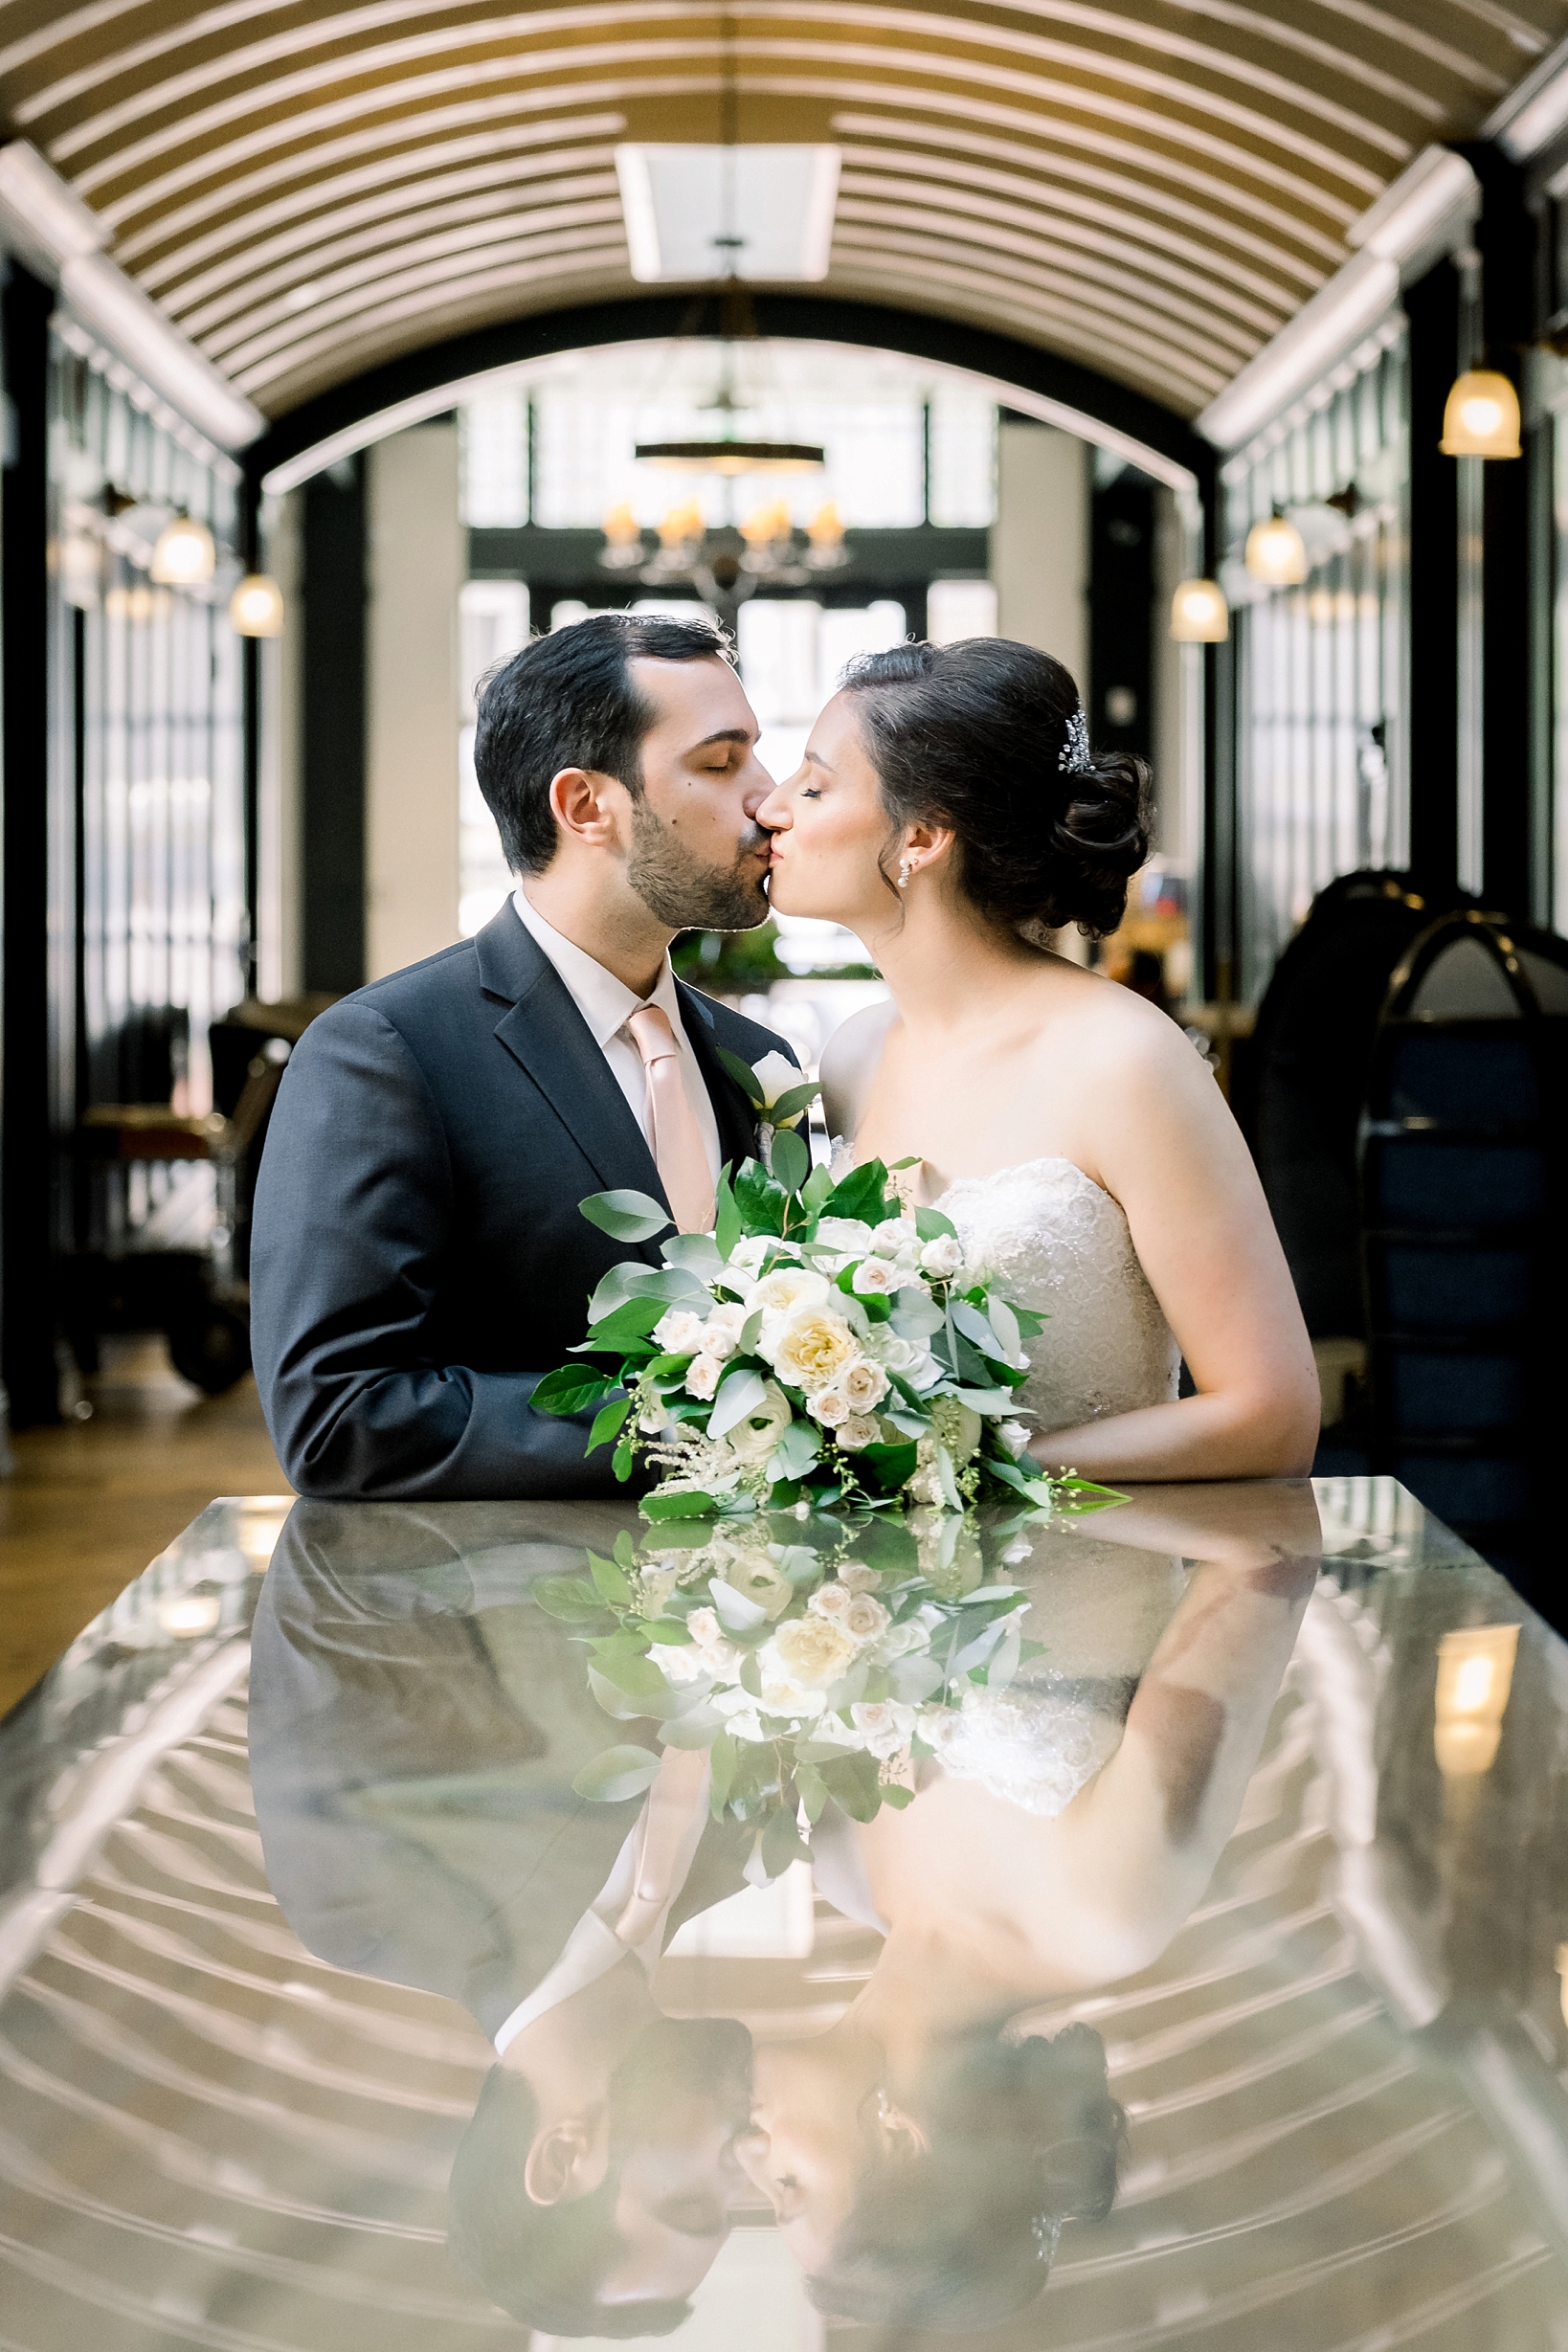 Bride and groom kiss while being reflected in the glass table in their reception on an oxford exchange wedding day